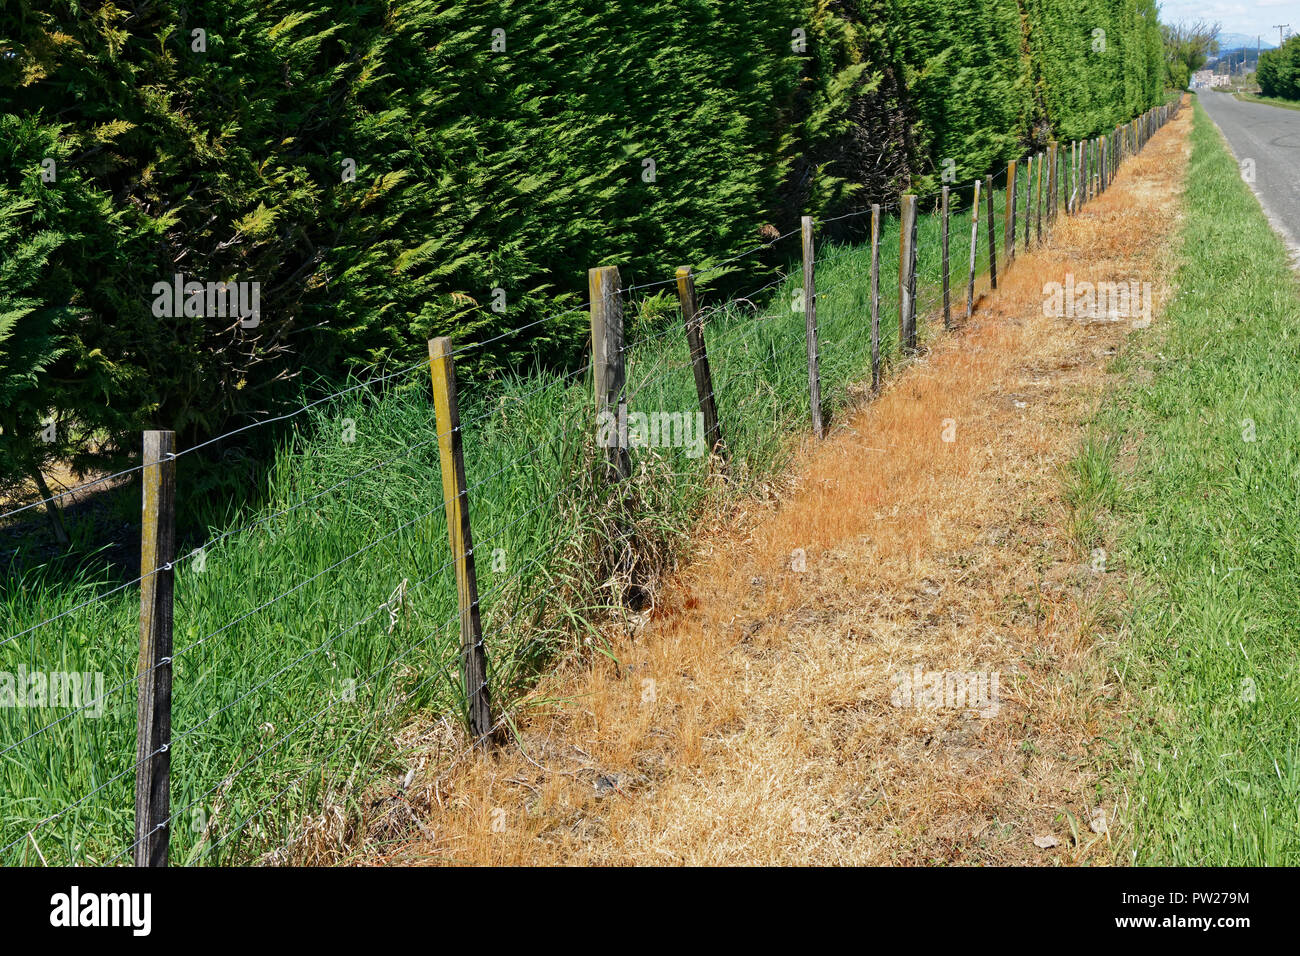 Herbicide use on a New Zealand roadside verge and fence line. New Zealand has a love affair with herbicide. Stock Photo